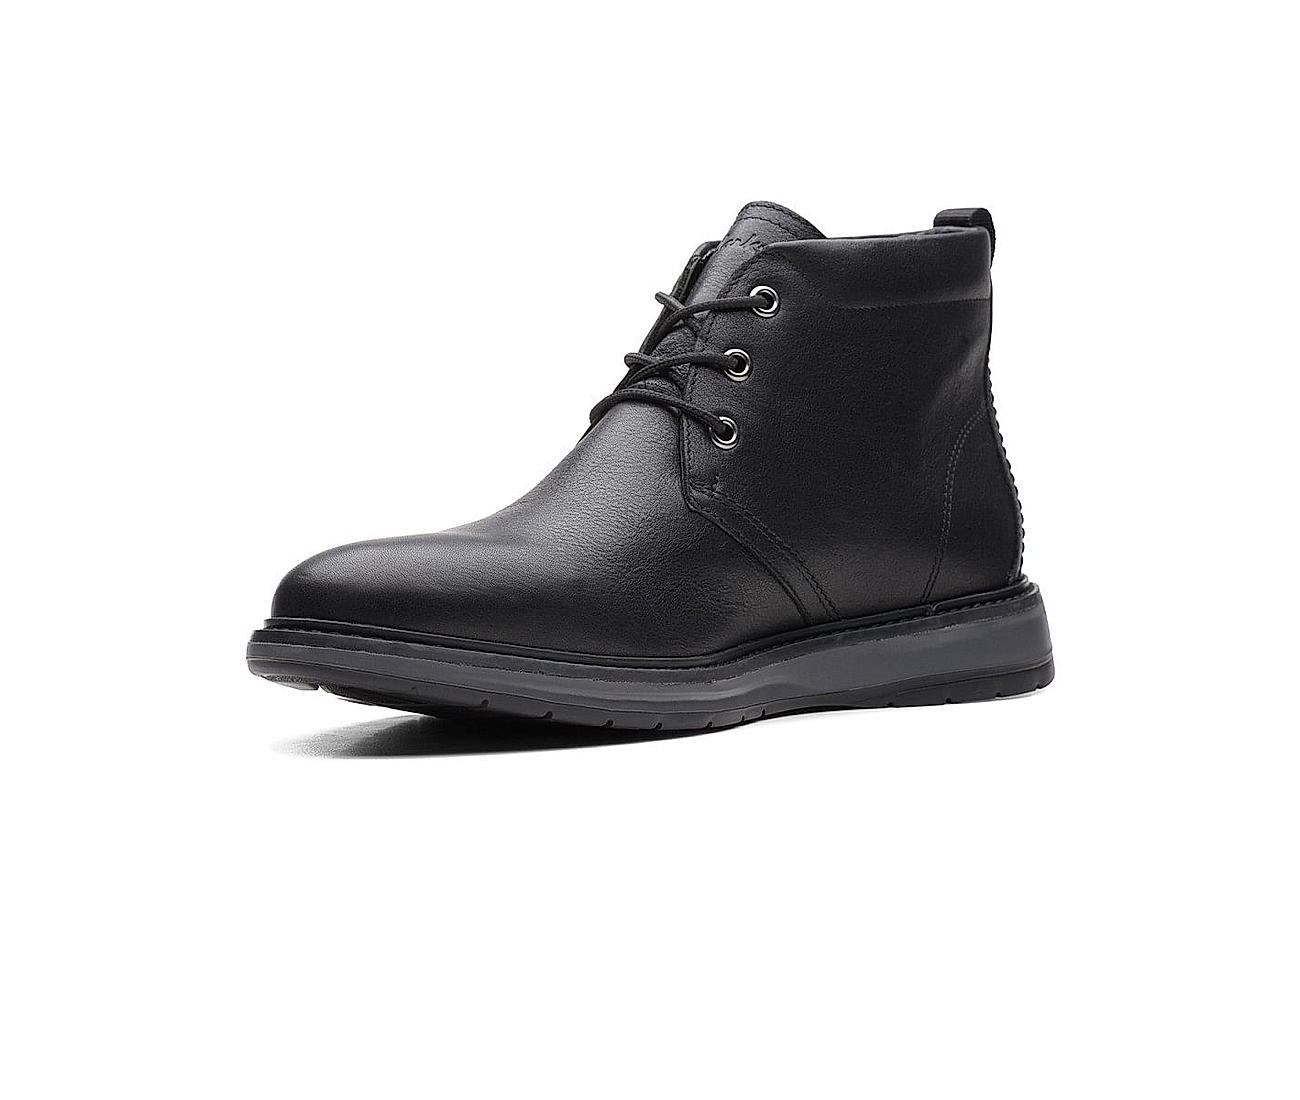 Clarks Mens Chantry Black Boots Online at Regal Shoes |8086339